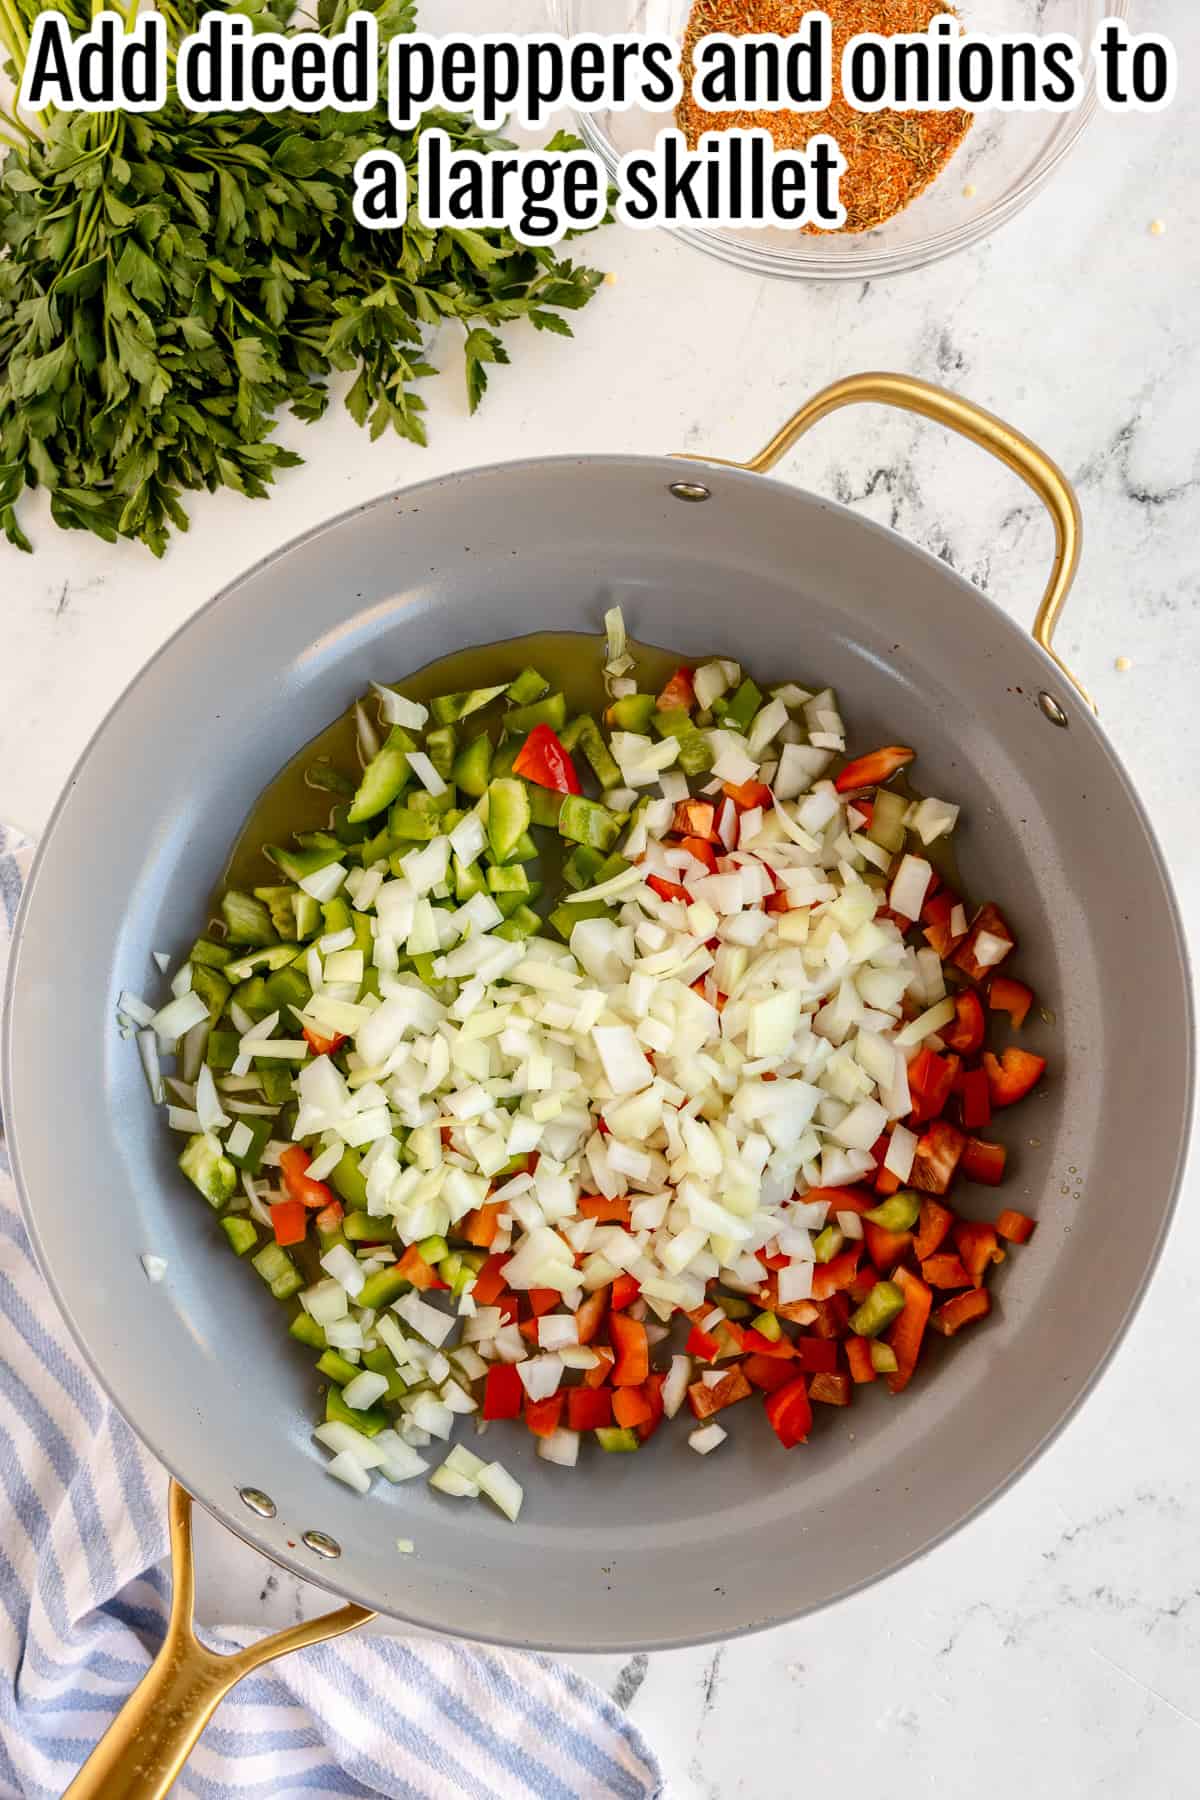 diced peppers and onions in a skillet.